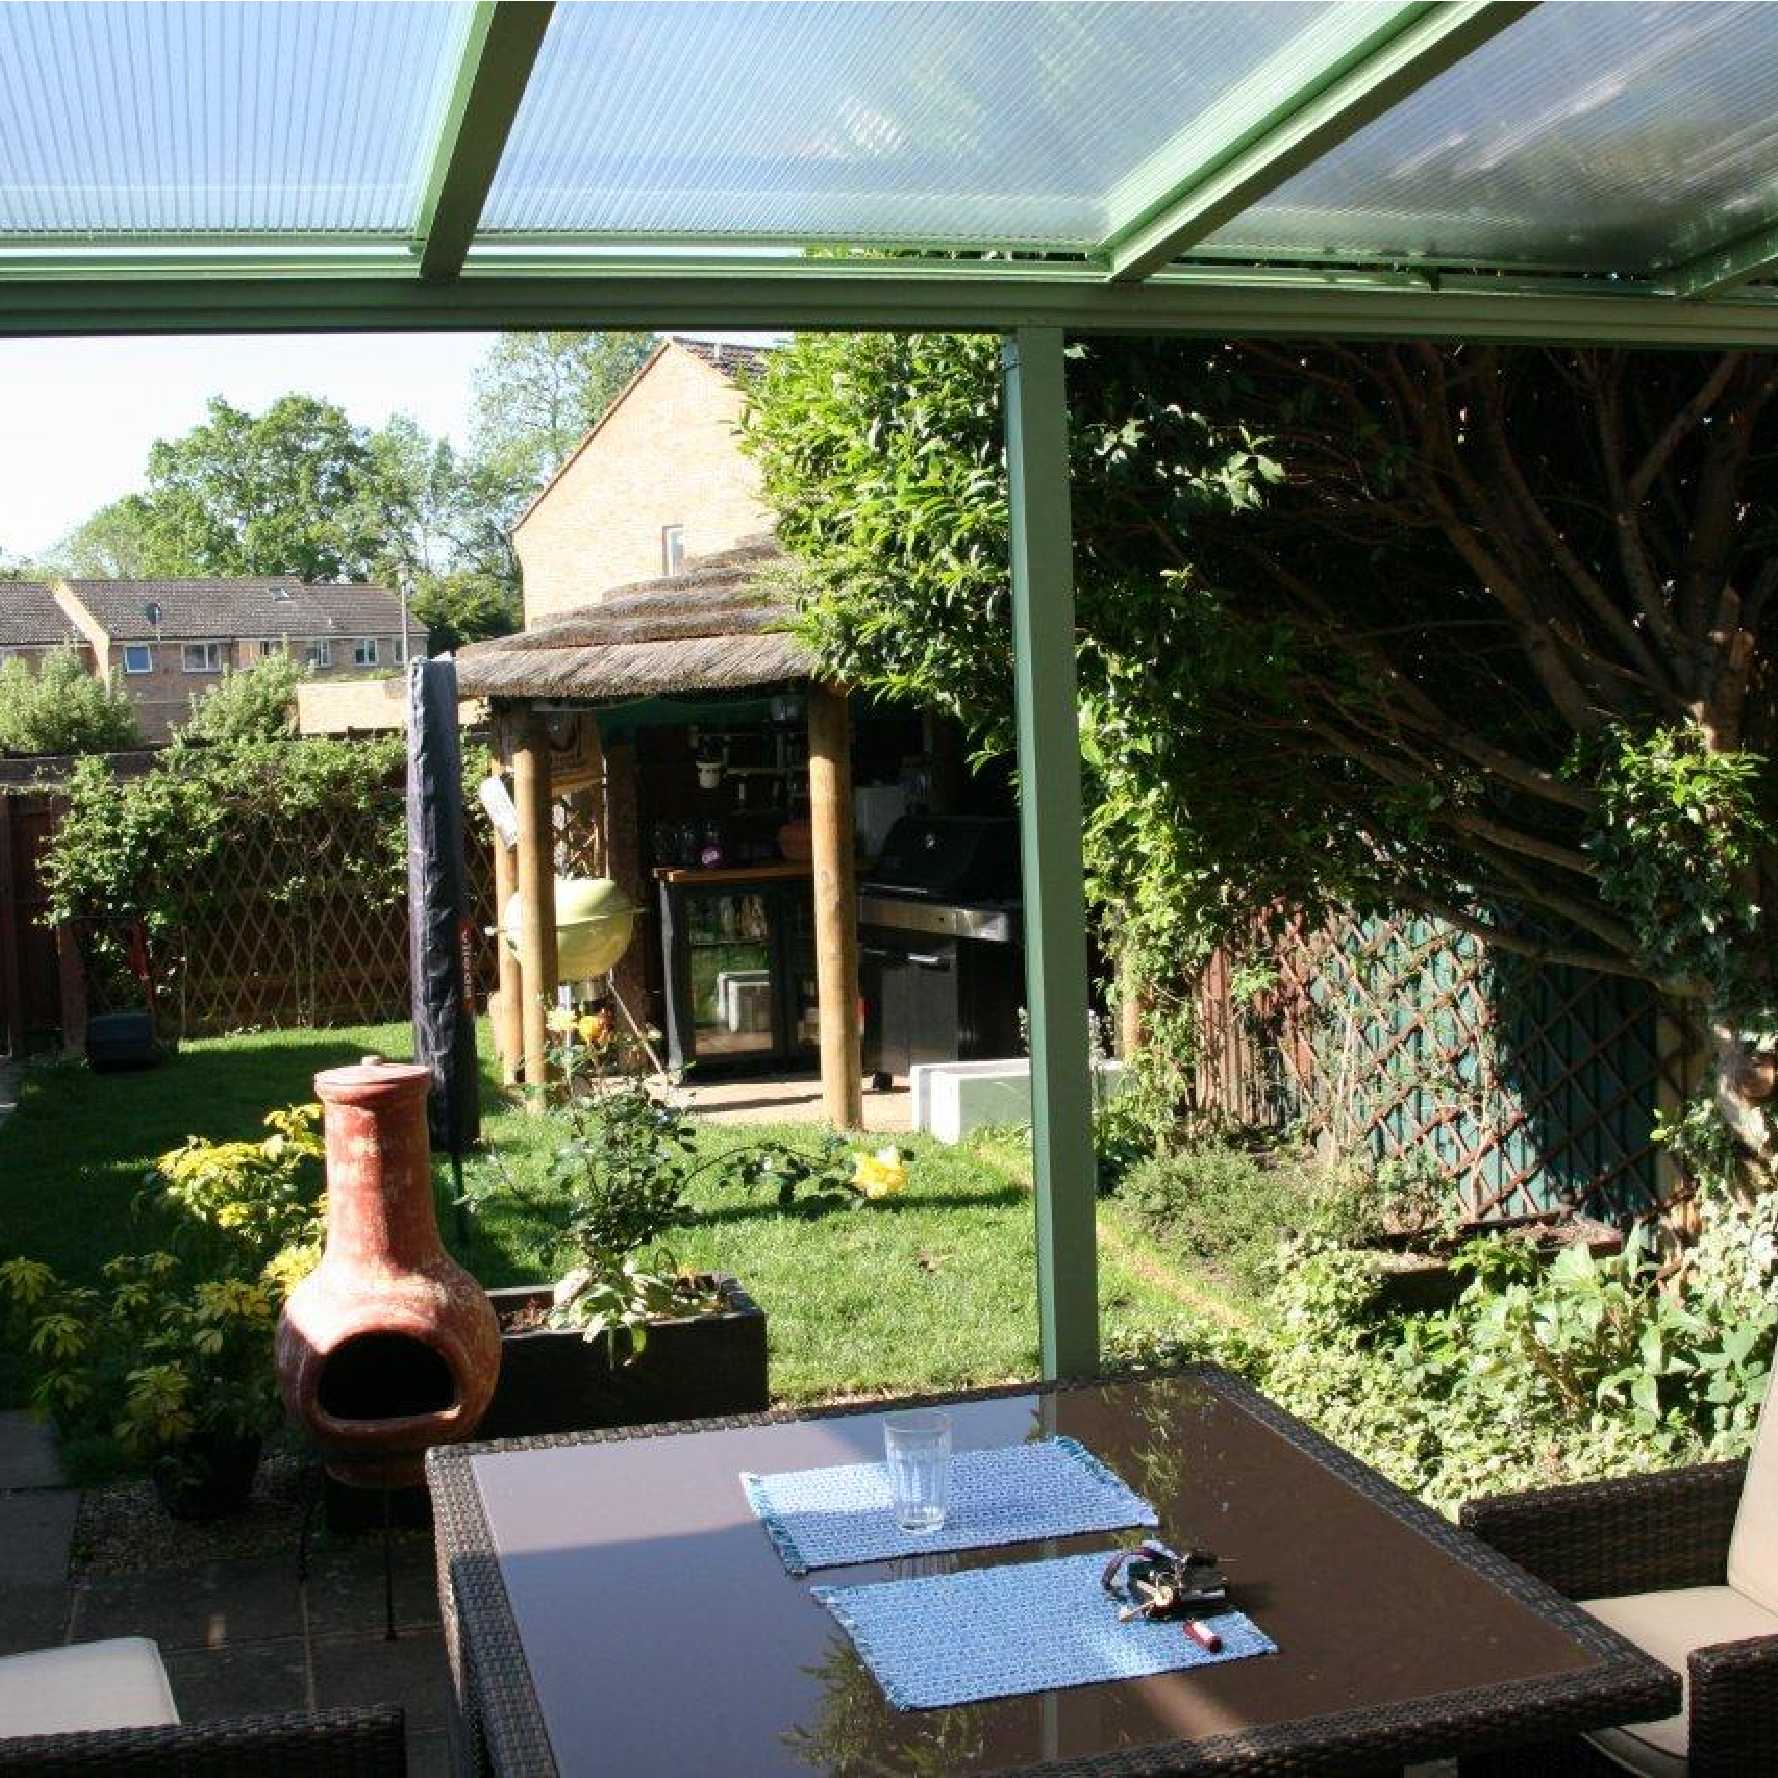 Affordable Omega Smart Lean-To Canopy, White with 16mm Polycarbonate Glazing - 12.0m (W) x 3.0m (P), (5) Supporting Posts